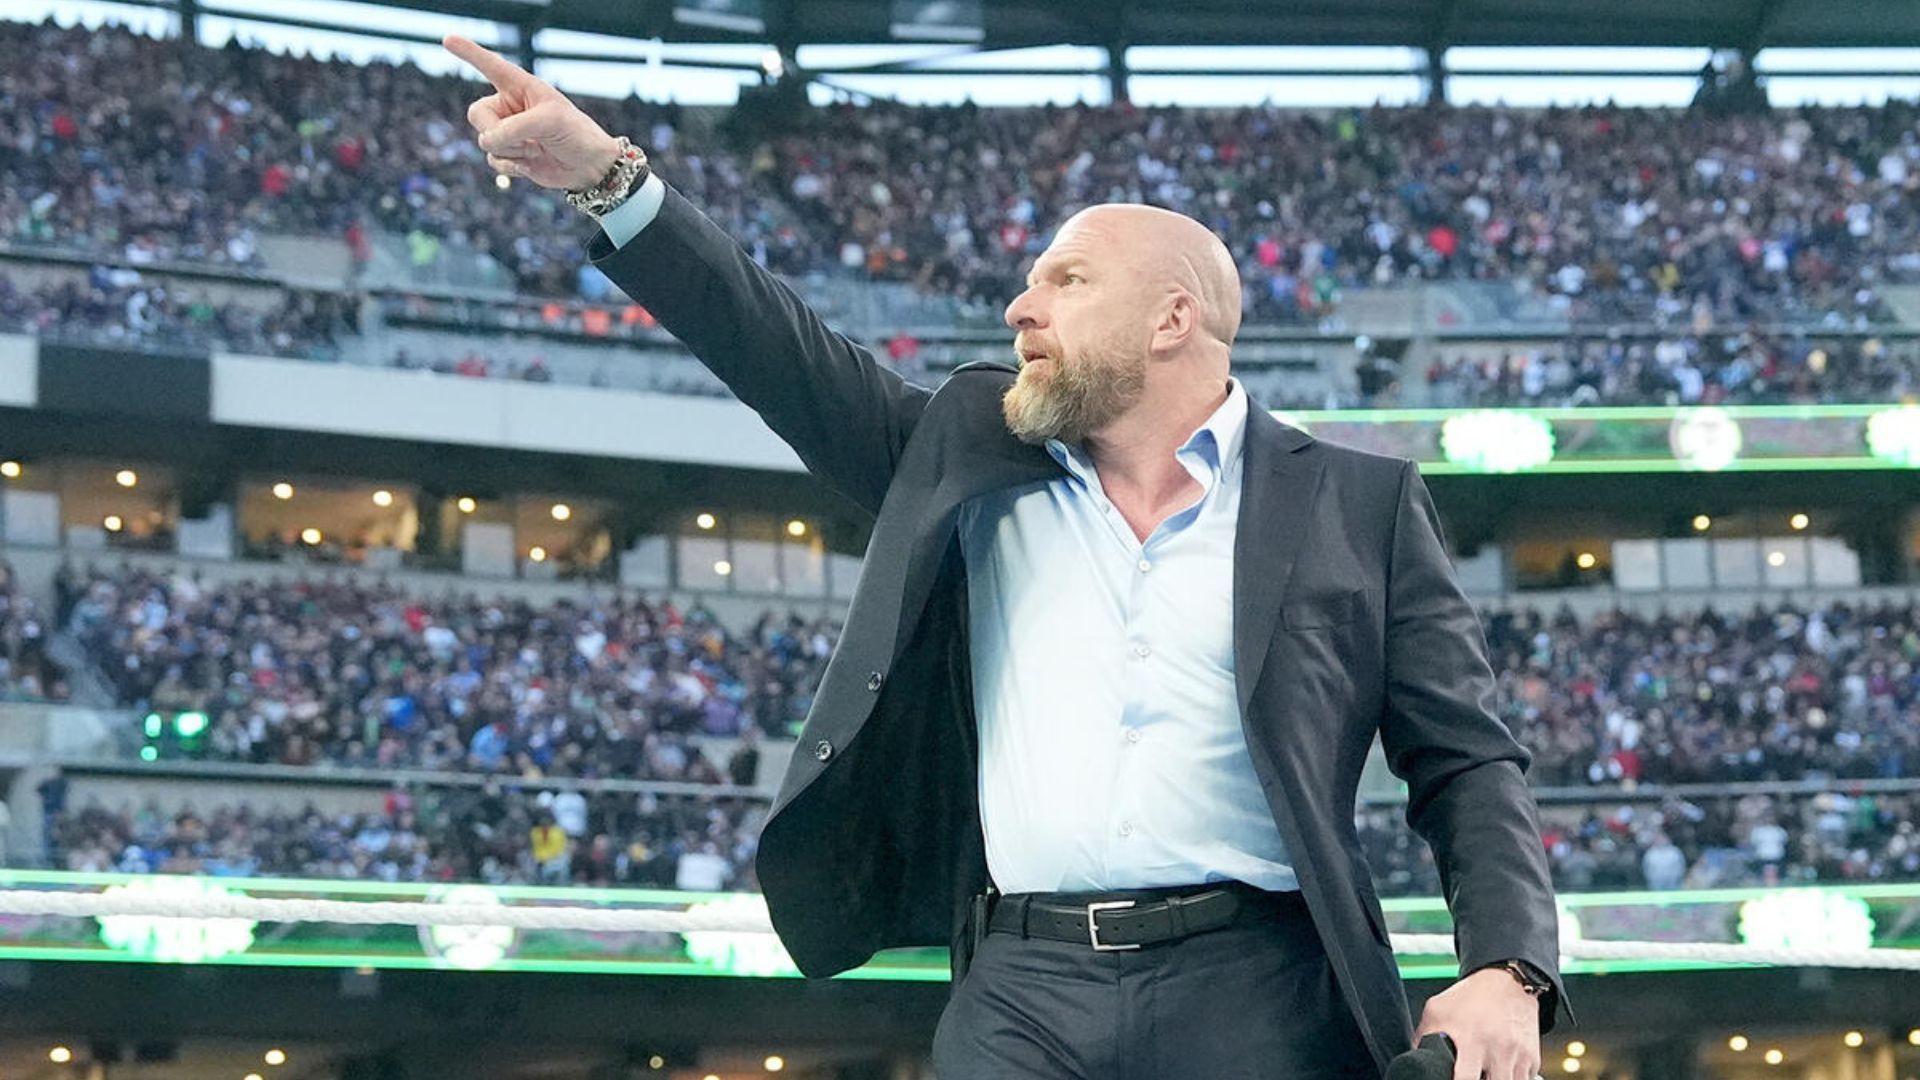 The Triple H era is here to stay in WWE.